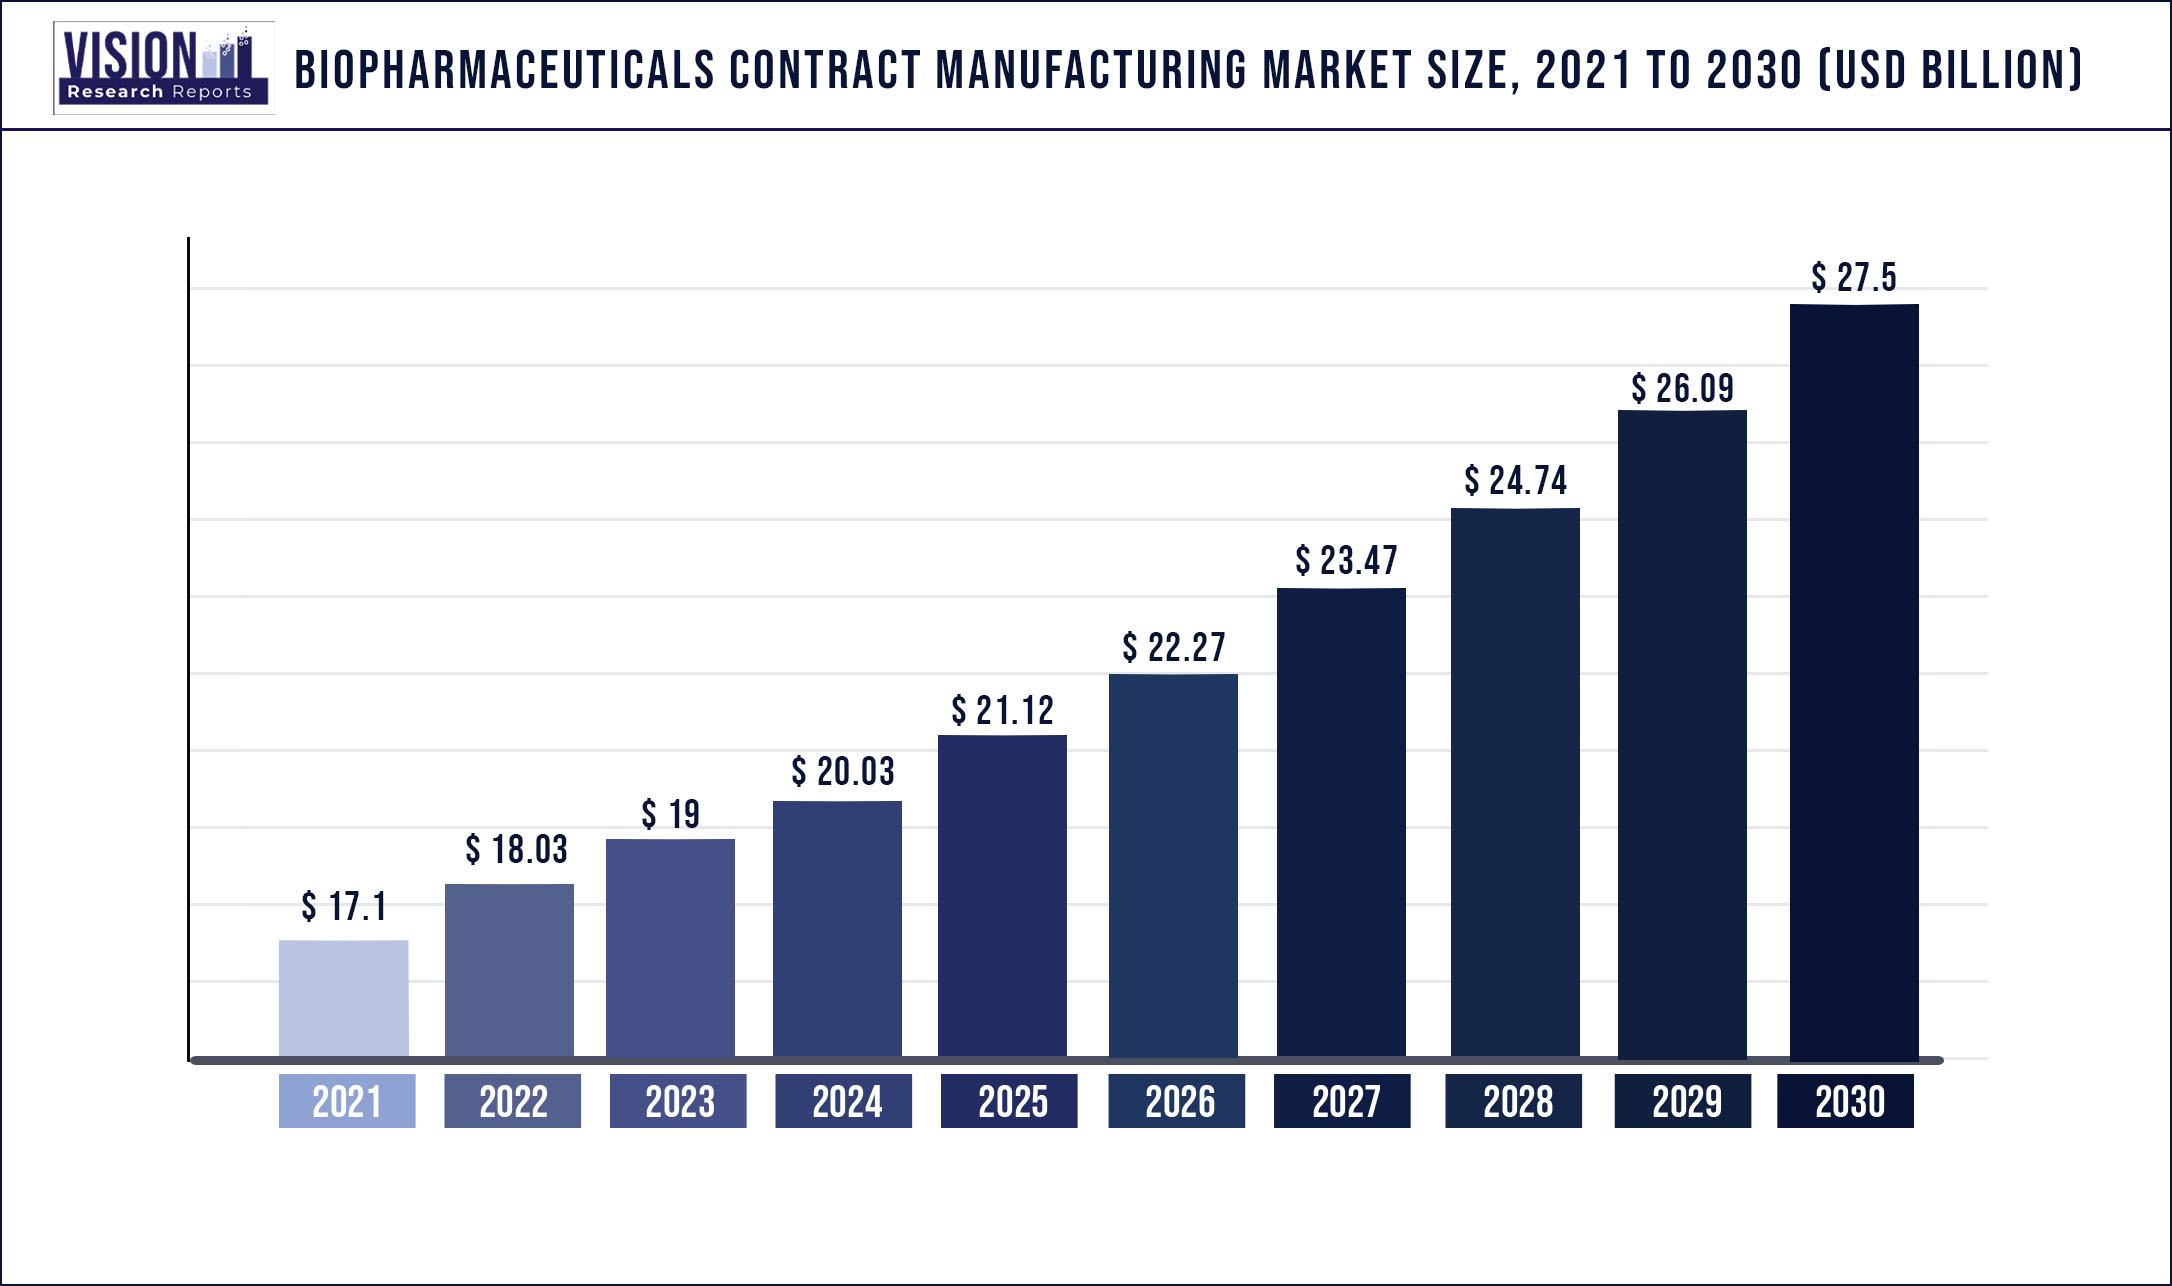 Biopharmaceuticals Contract Manufacturing Market Size 2021 to 2030